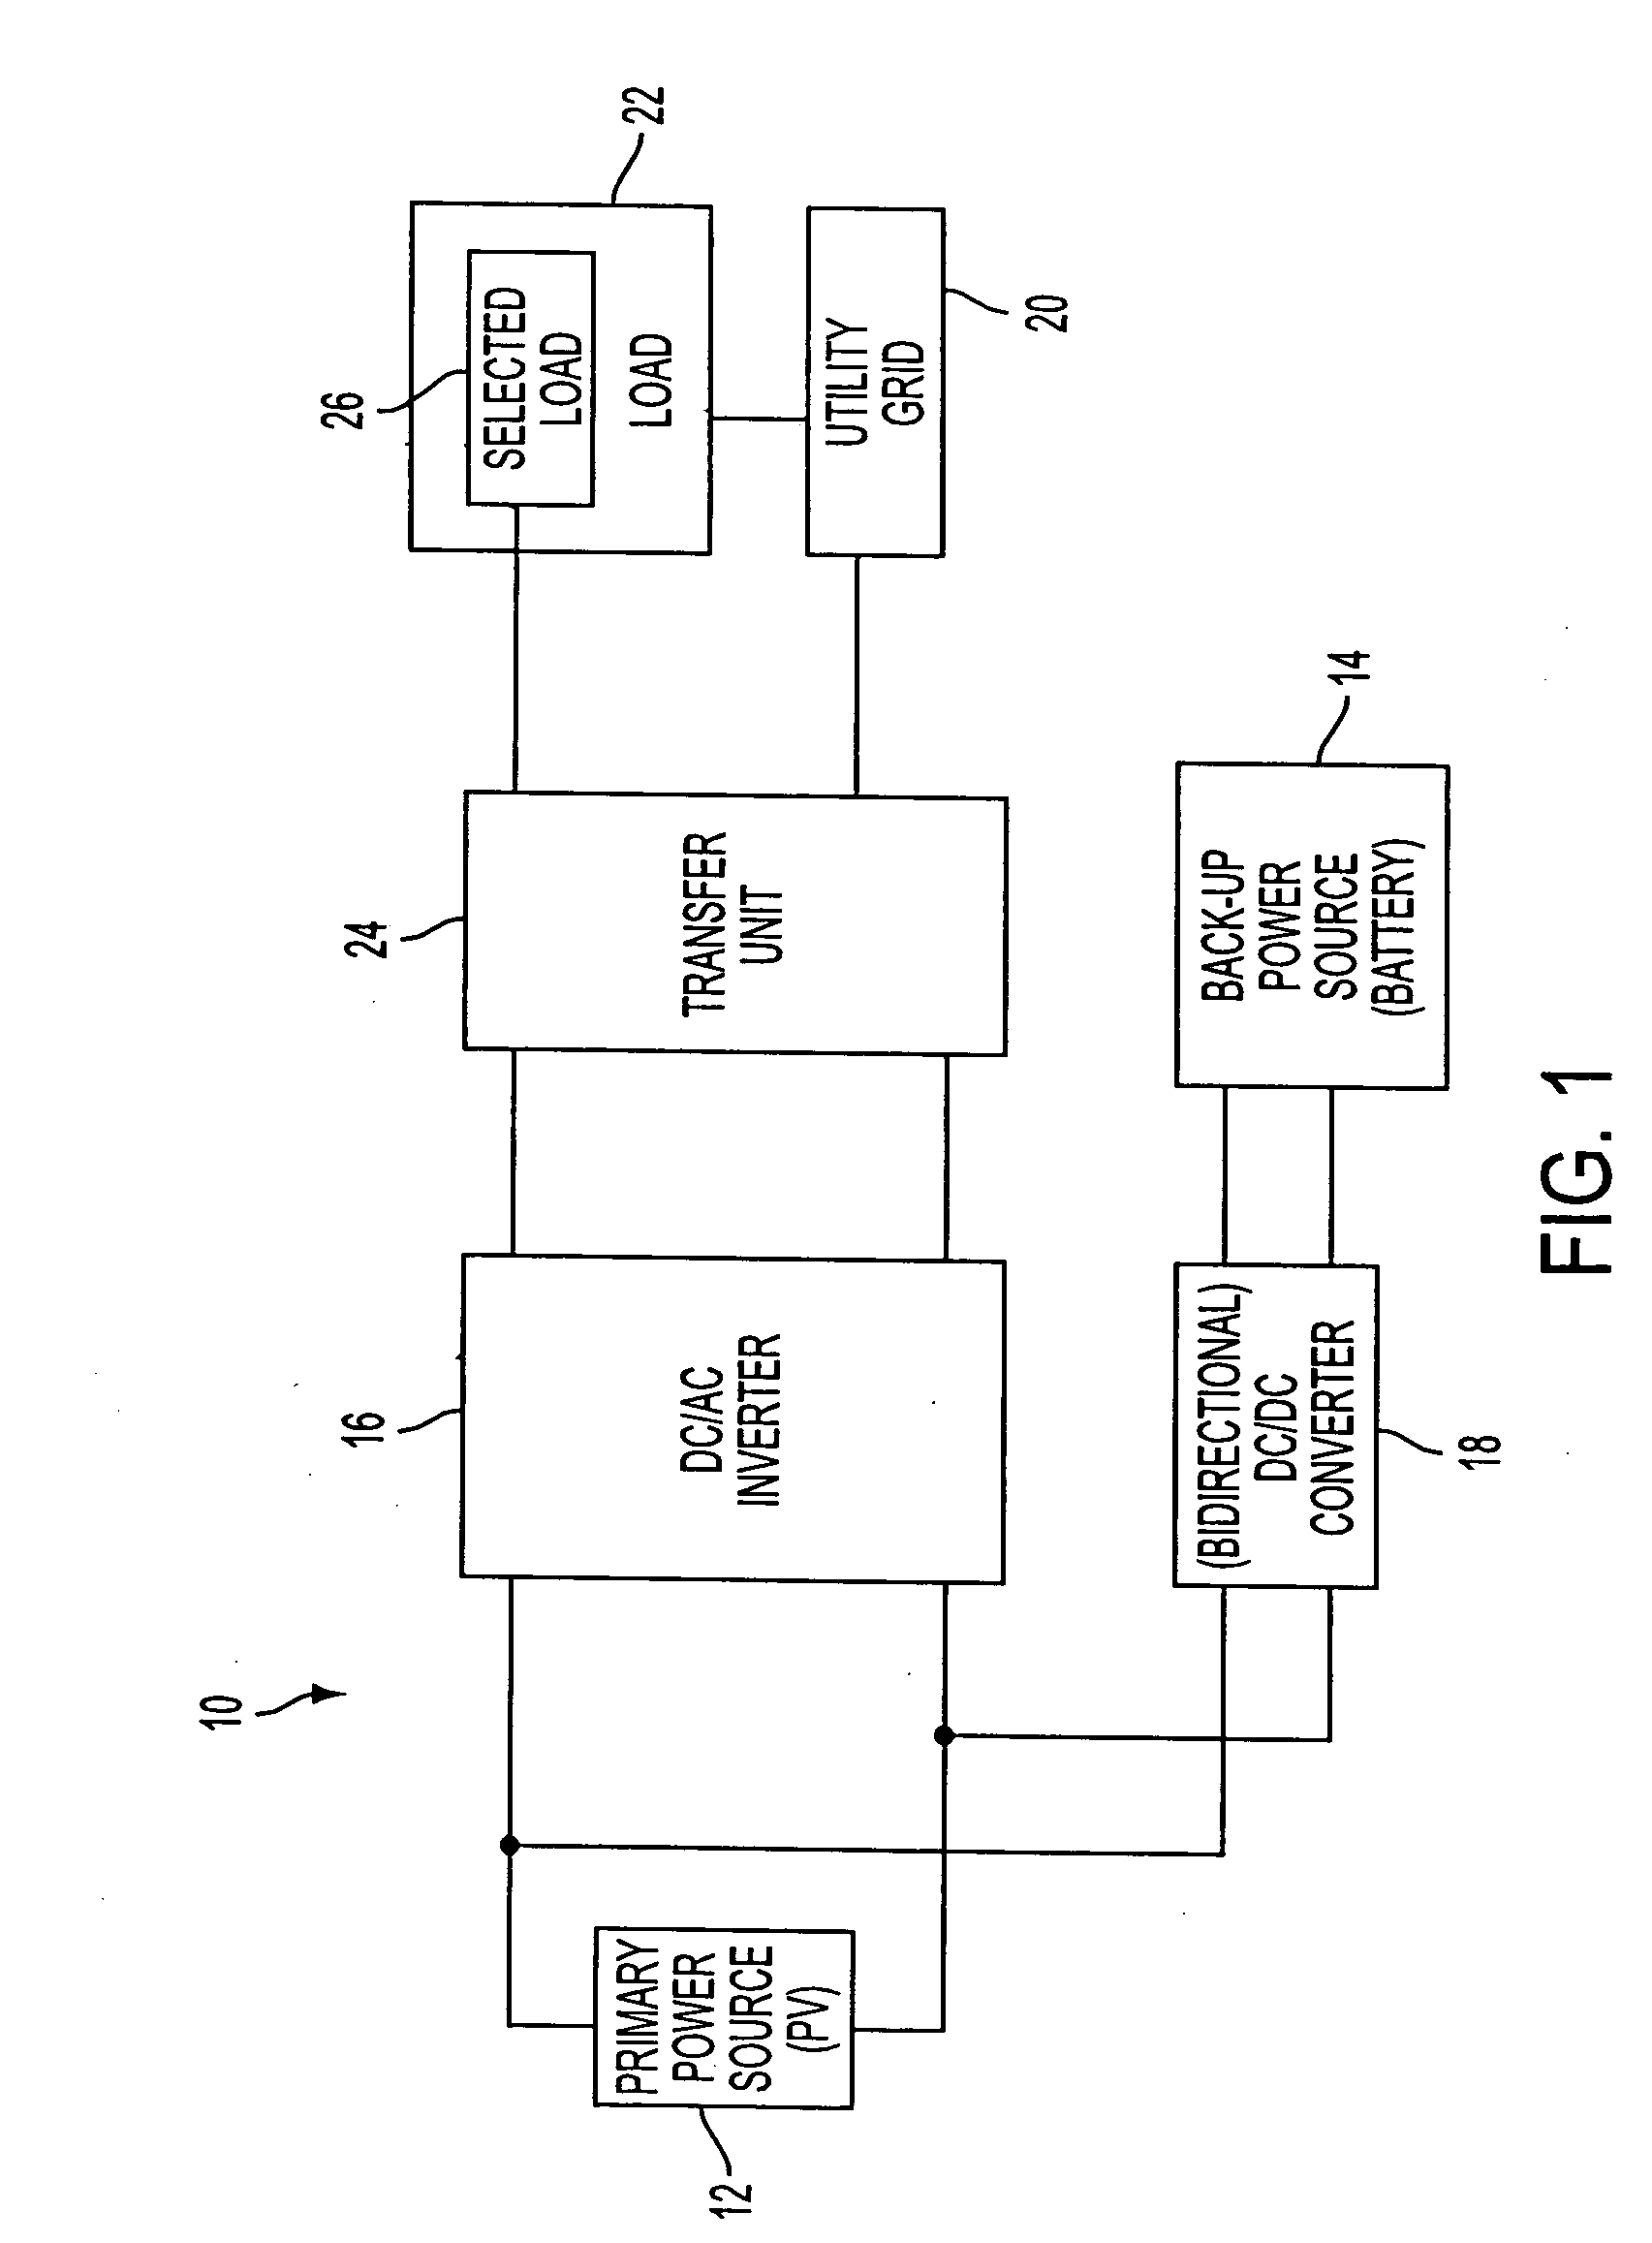 Grid-connected power systems having back-up power sources and methods of providing back-up power in grid-connected power systems